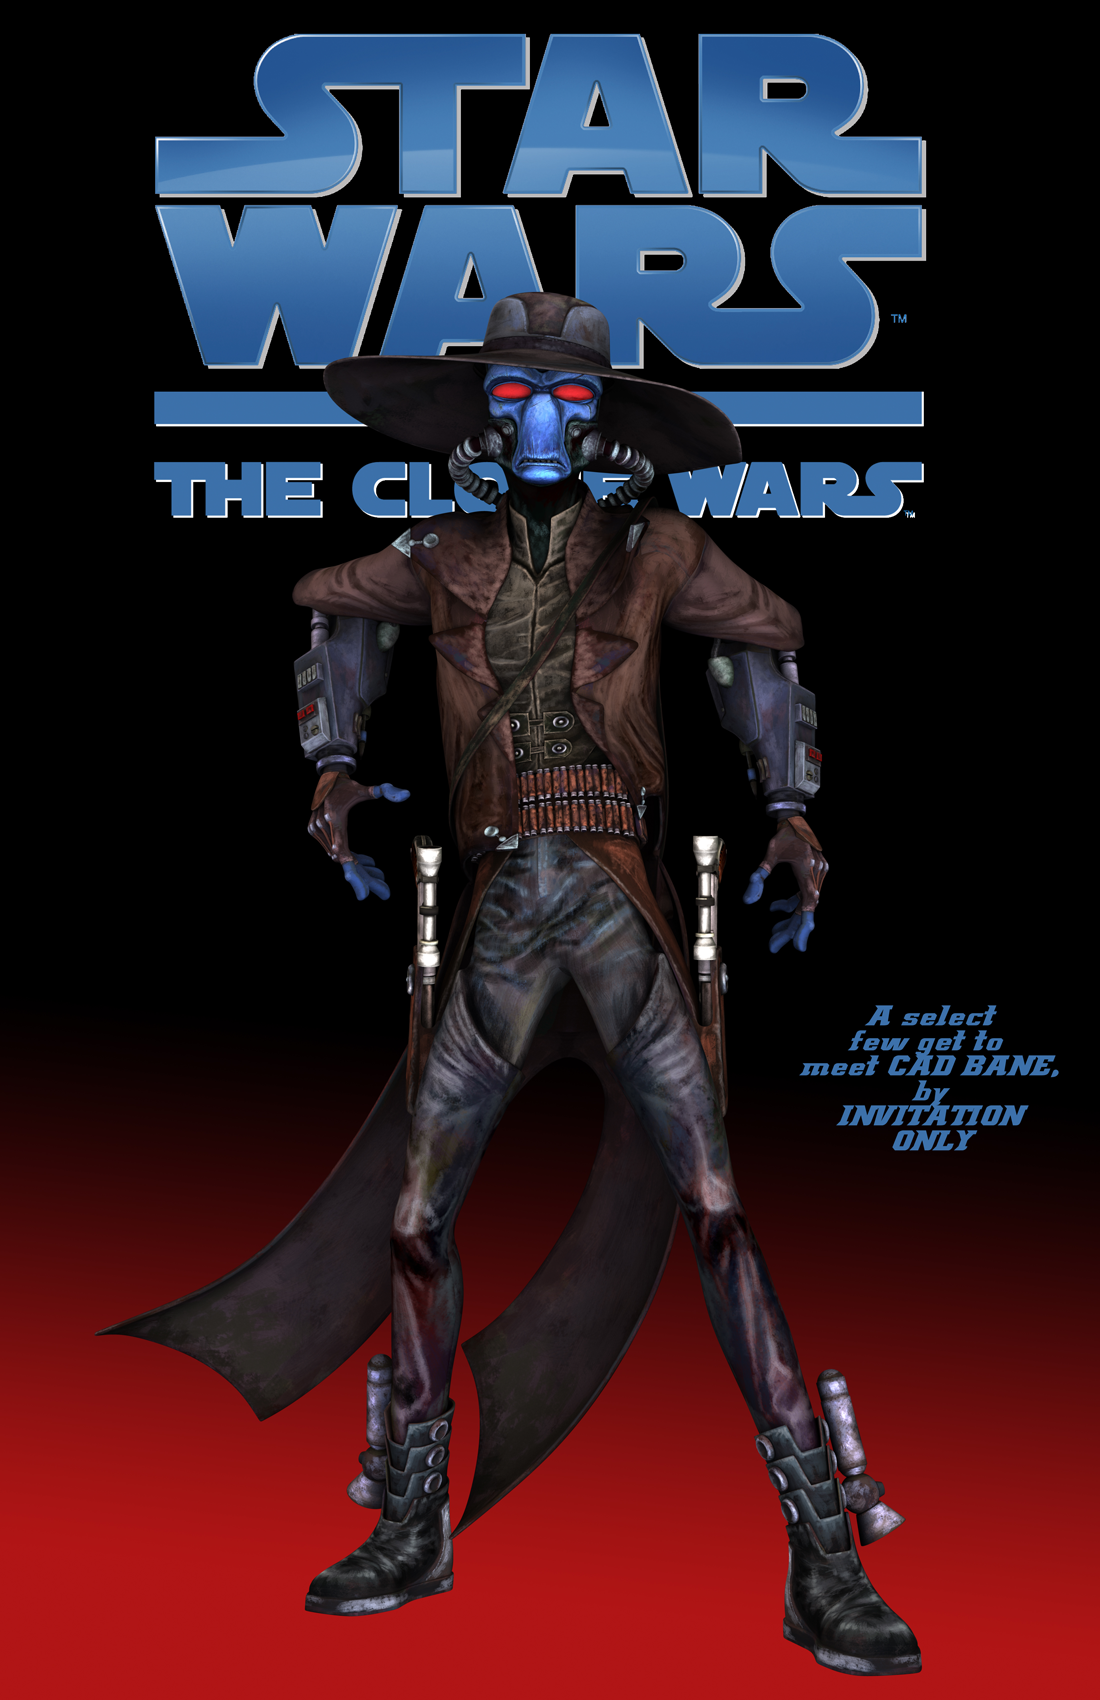 The Clone Wars: Invitation Only